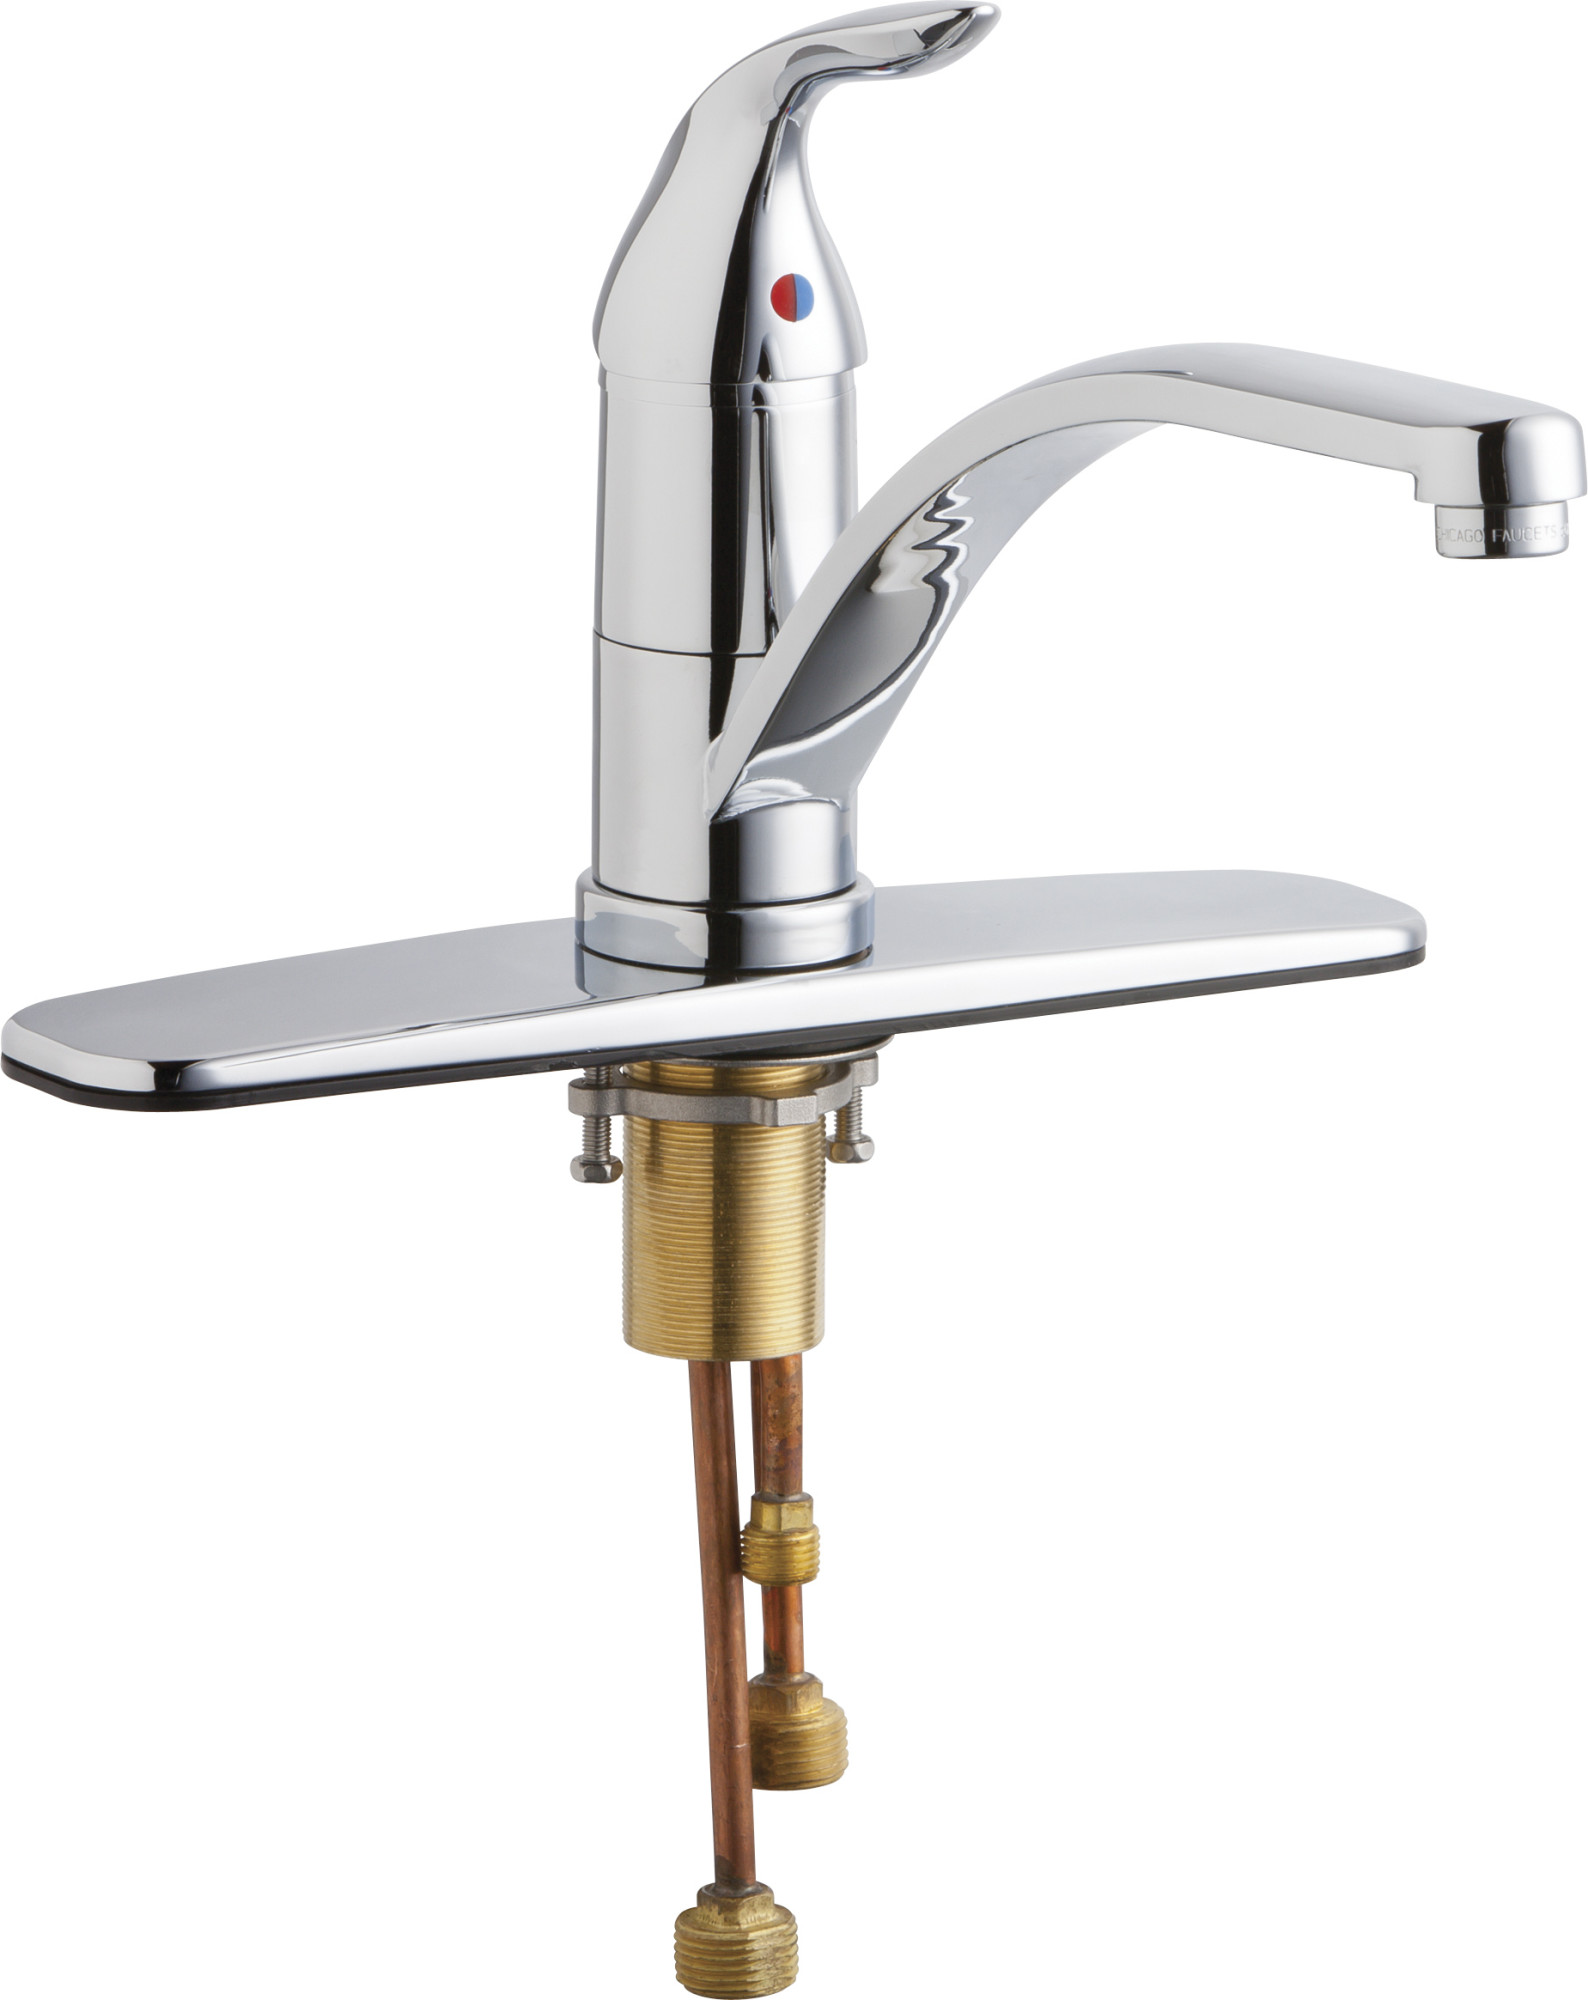 Chicago Faucets 431 AB Commercial Grade Kitchen Faucet Chrome 611943473303 EBay